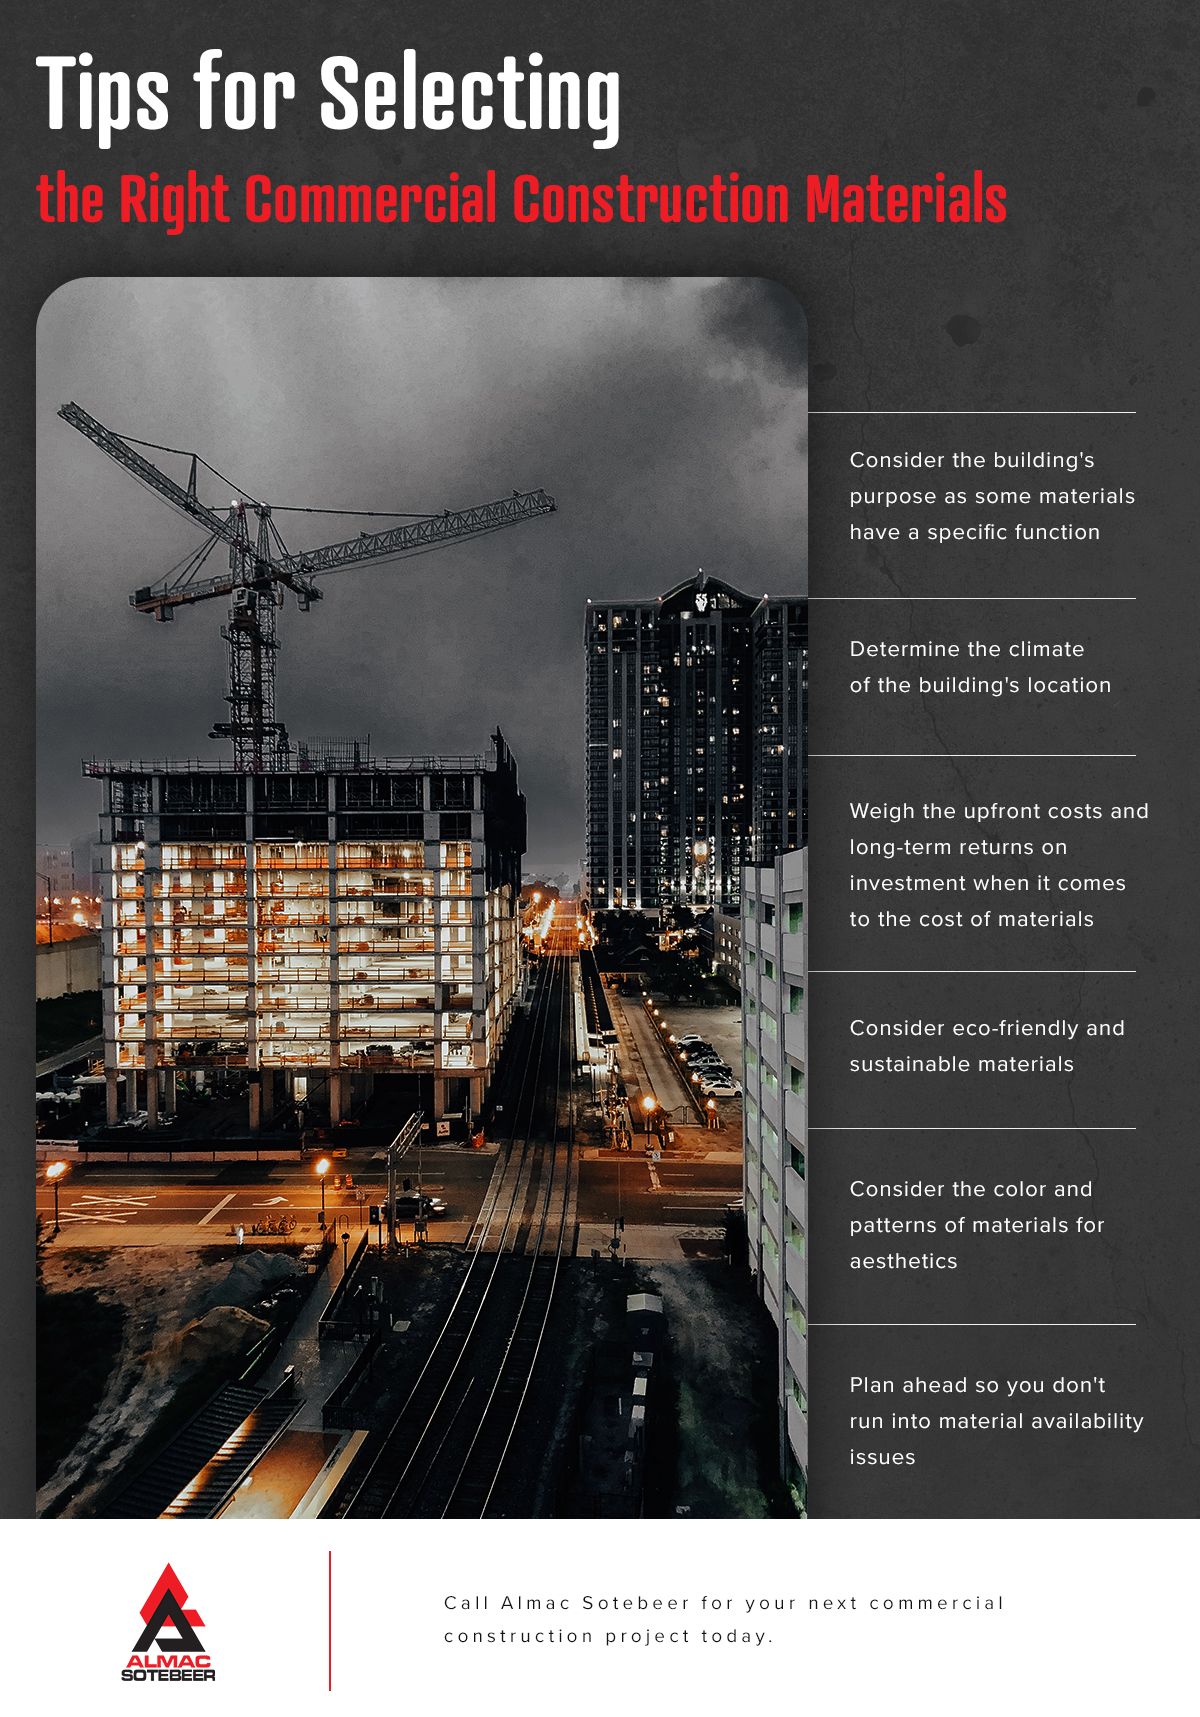 Selecting-the-Right-Commercial-Construction-Materials-infographic.jpg